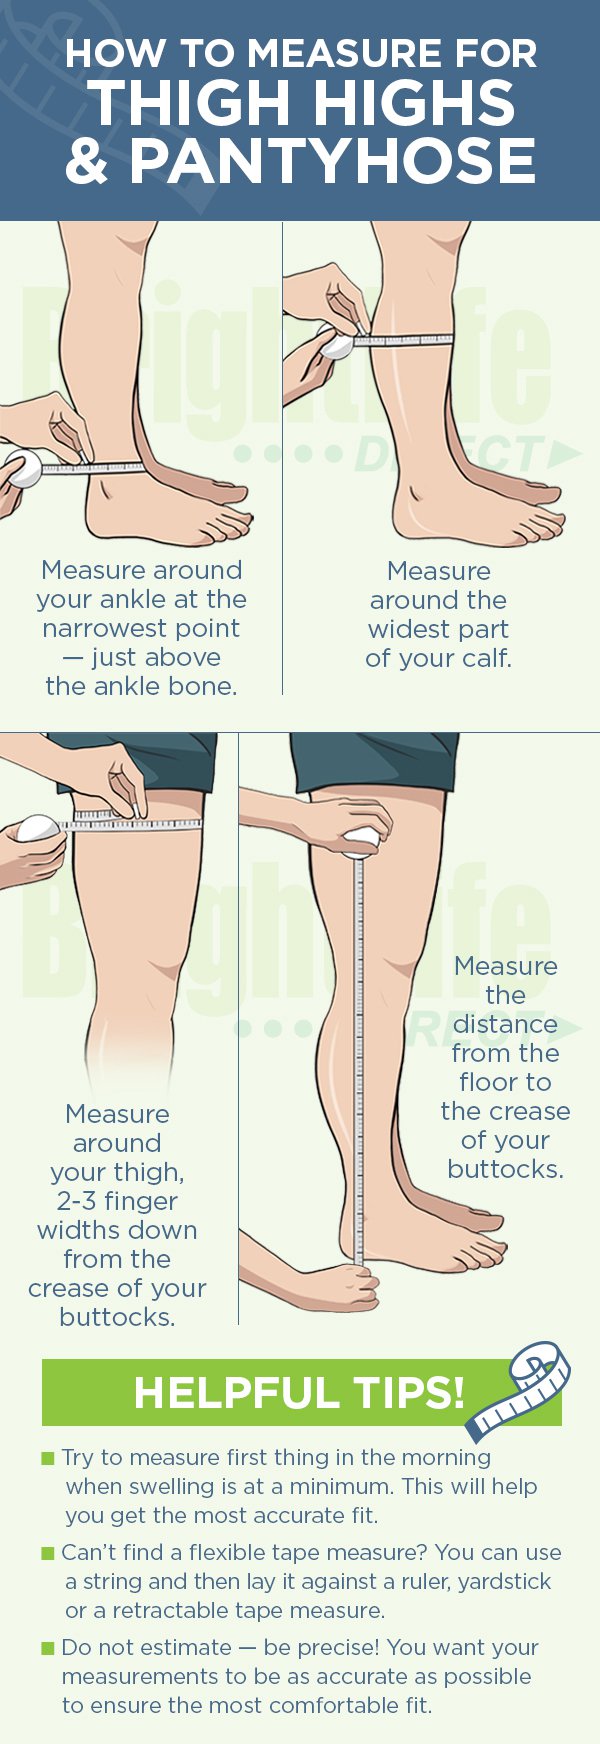 How to Measure Thigh High Compression Stockings - First measure around your ankle at the slimmest point. Next, measure your calf at the widest point. Then, measure your upper thigh circumference. Finally, measure your lower leg length from the floor to the bend in the knee.